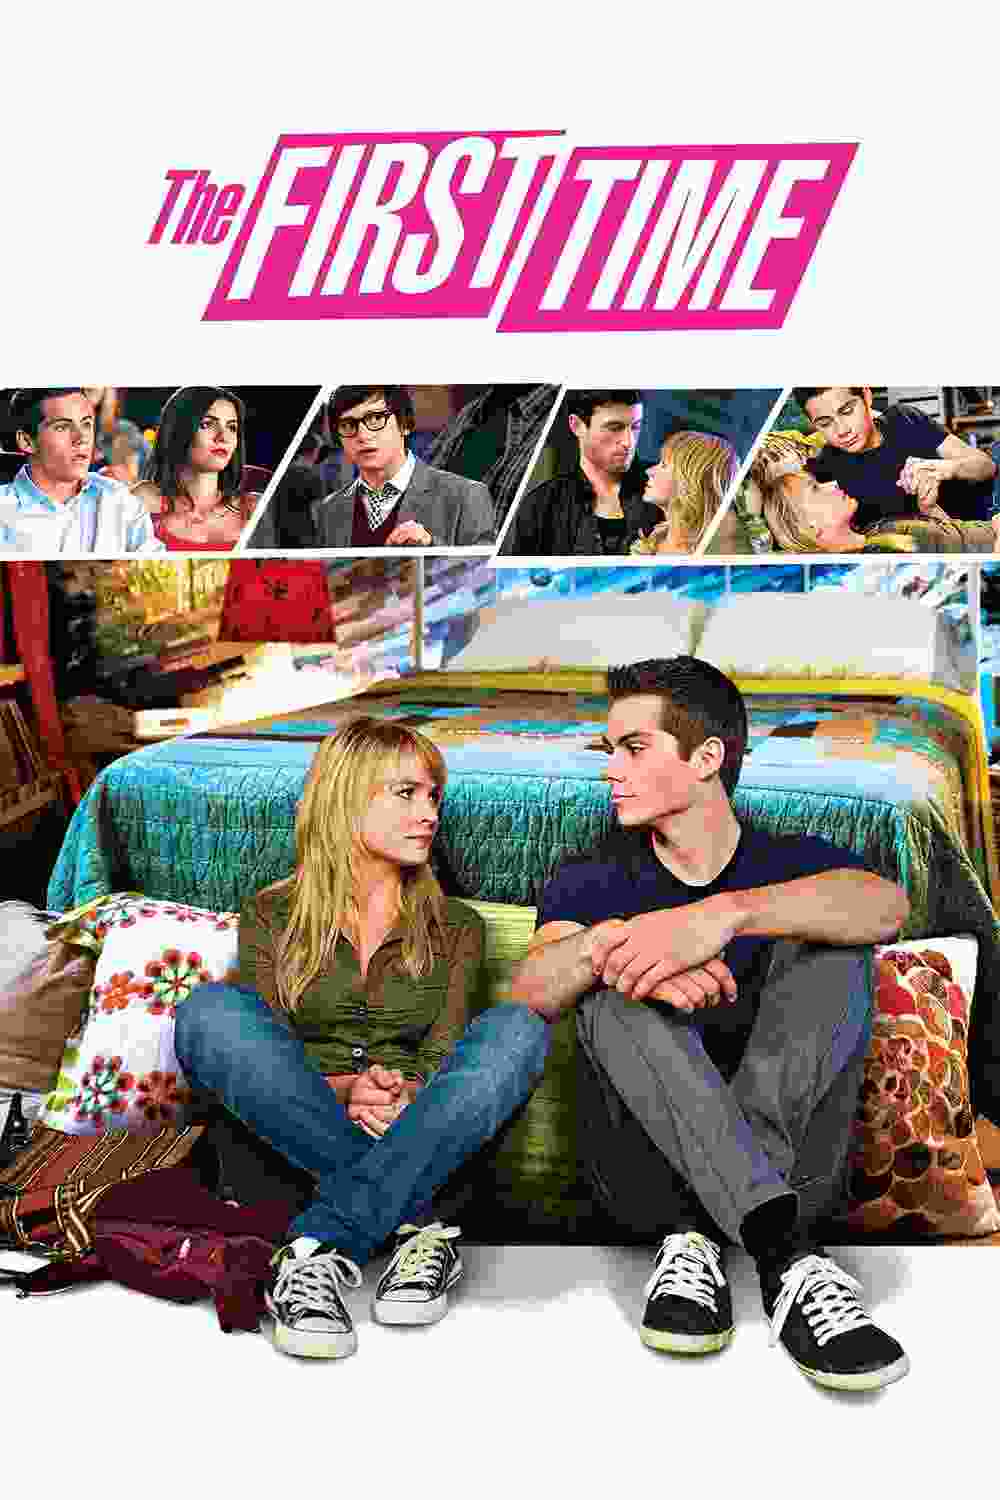 The First Time (2012) vj Junior Dylan O'Brien